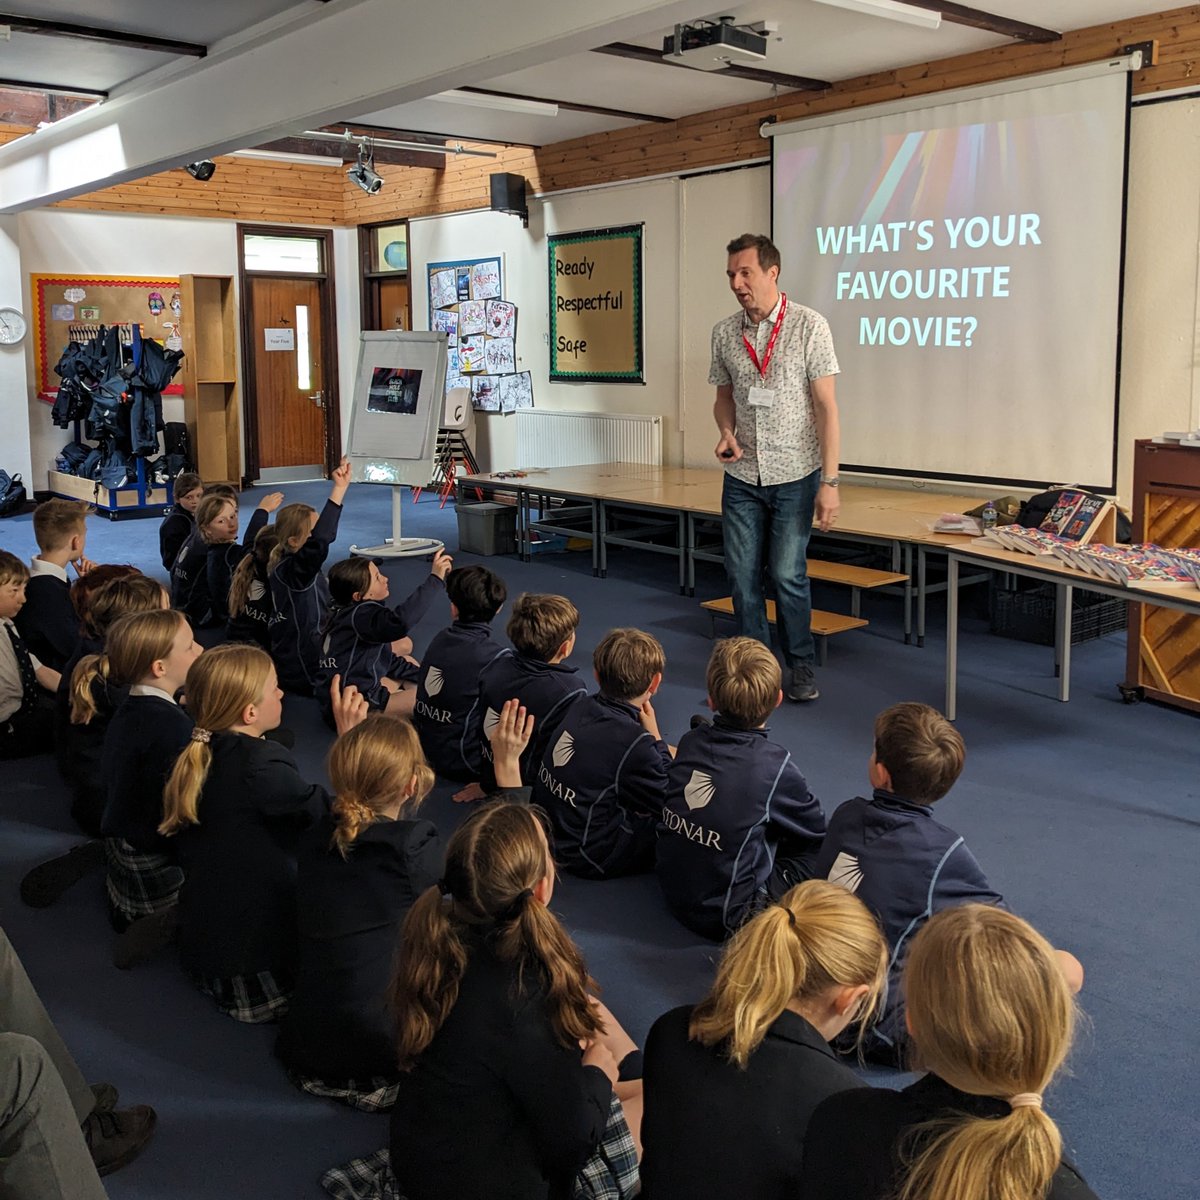 We welcomed @edgechristopher, award-winning children's author, to #StonarPrep today, to speak to pupils in Years 4-6. It was a great session, with an interactive presentation, discussions about his books and plenty of opportunities to ask lots of questions #stonar #authorvisit